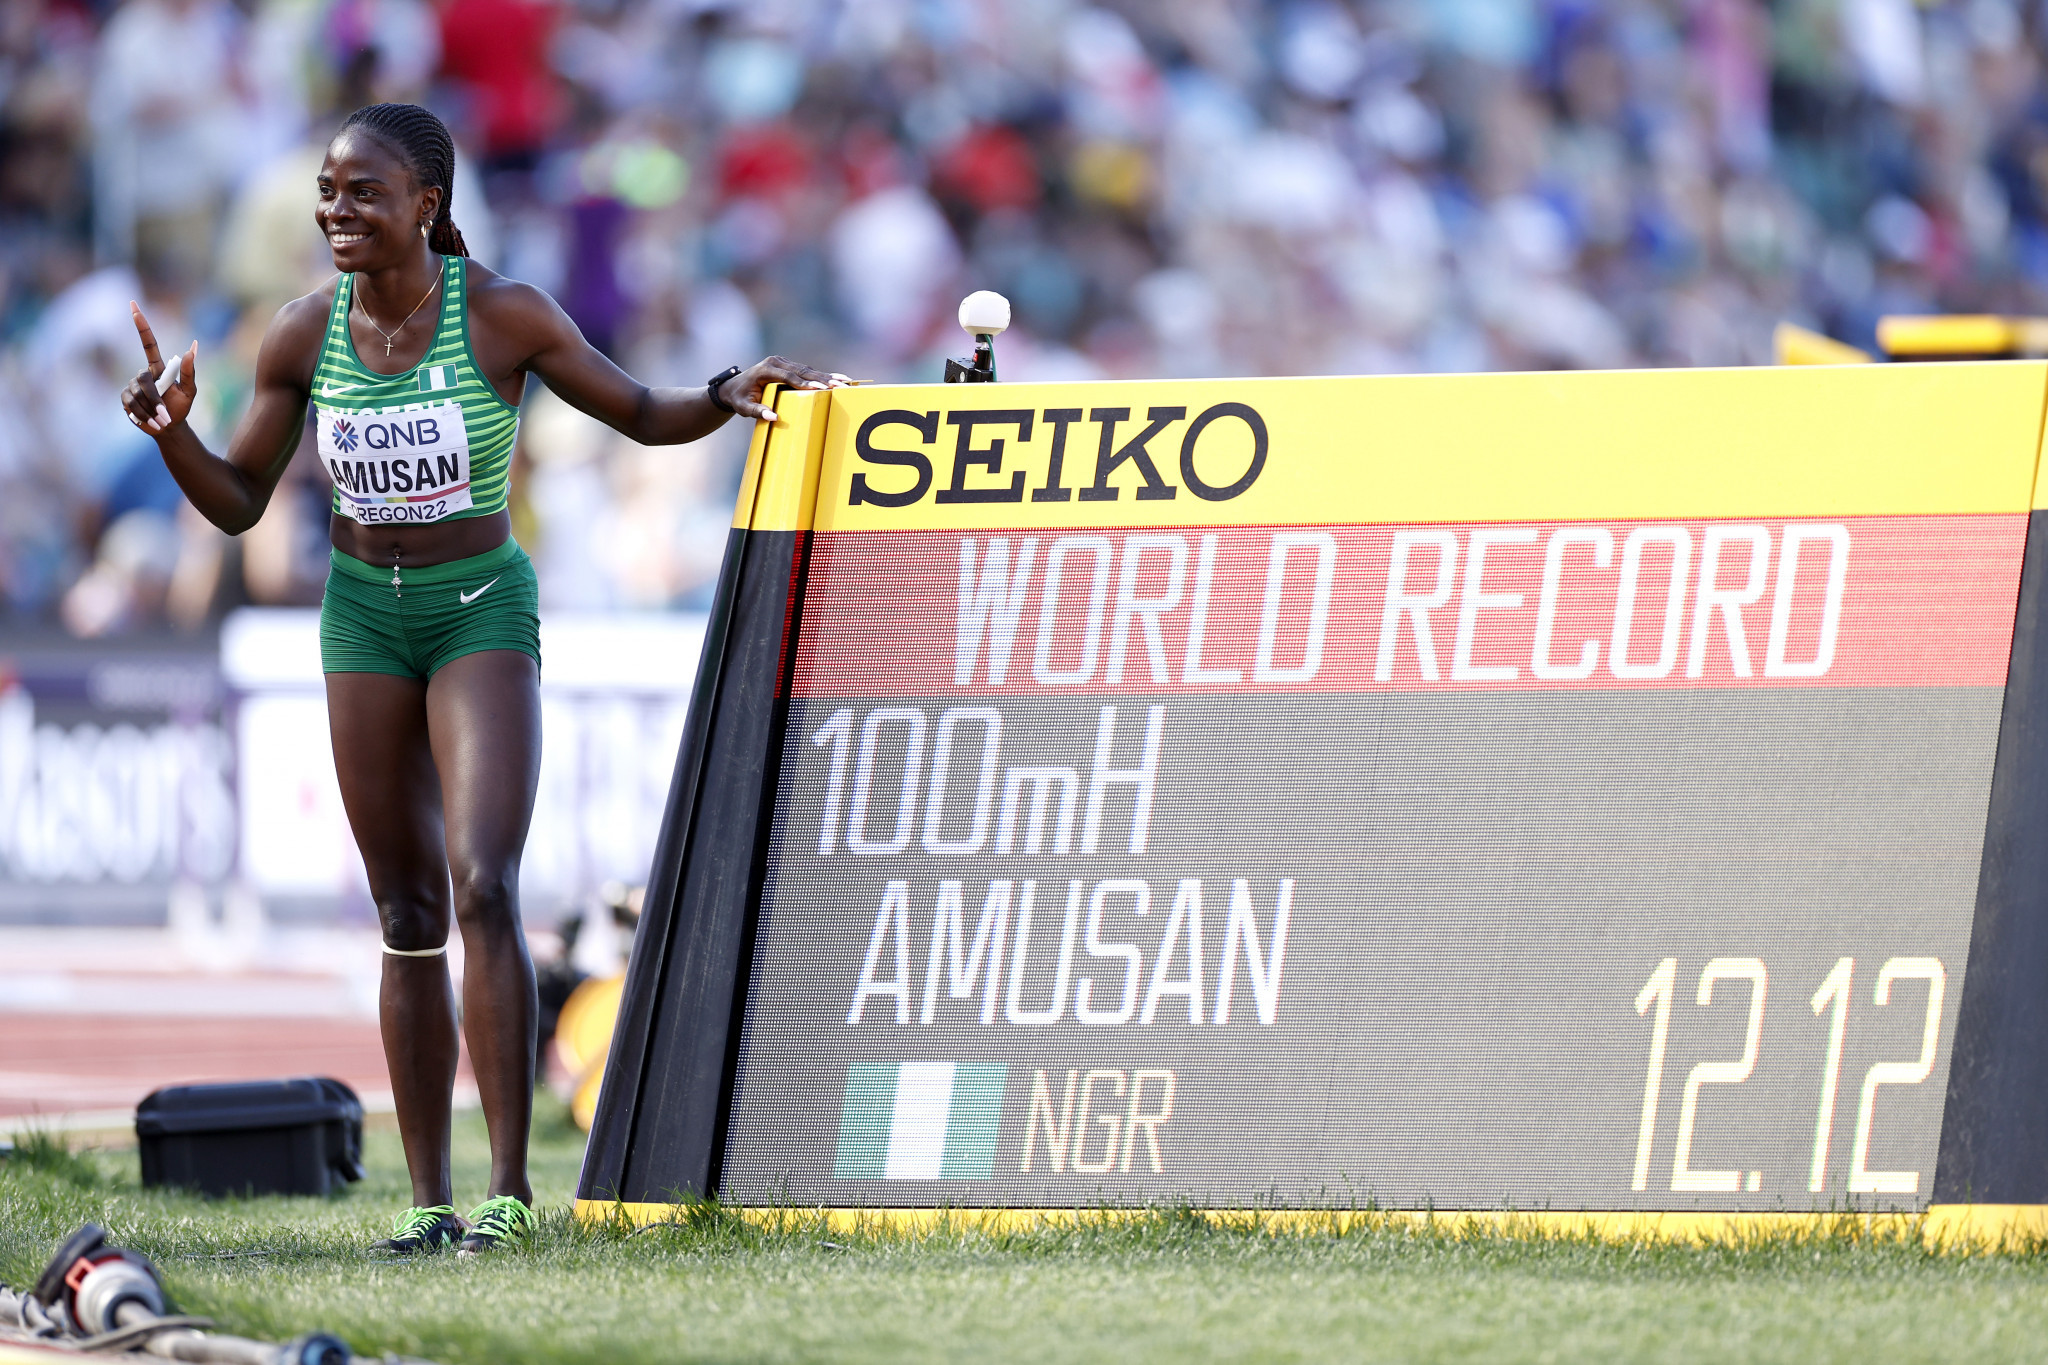 Johnson accused of racism as casts doubt over remarkable Amusan world record